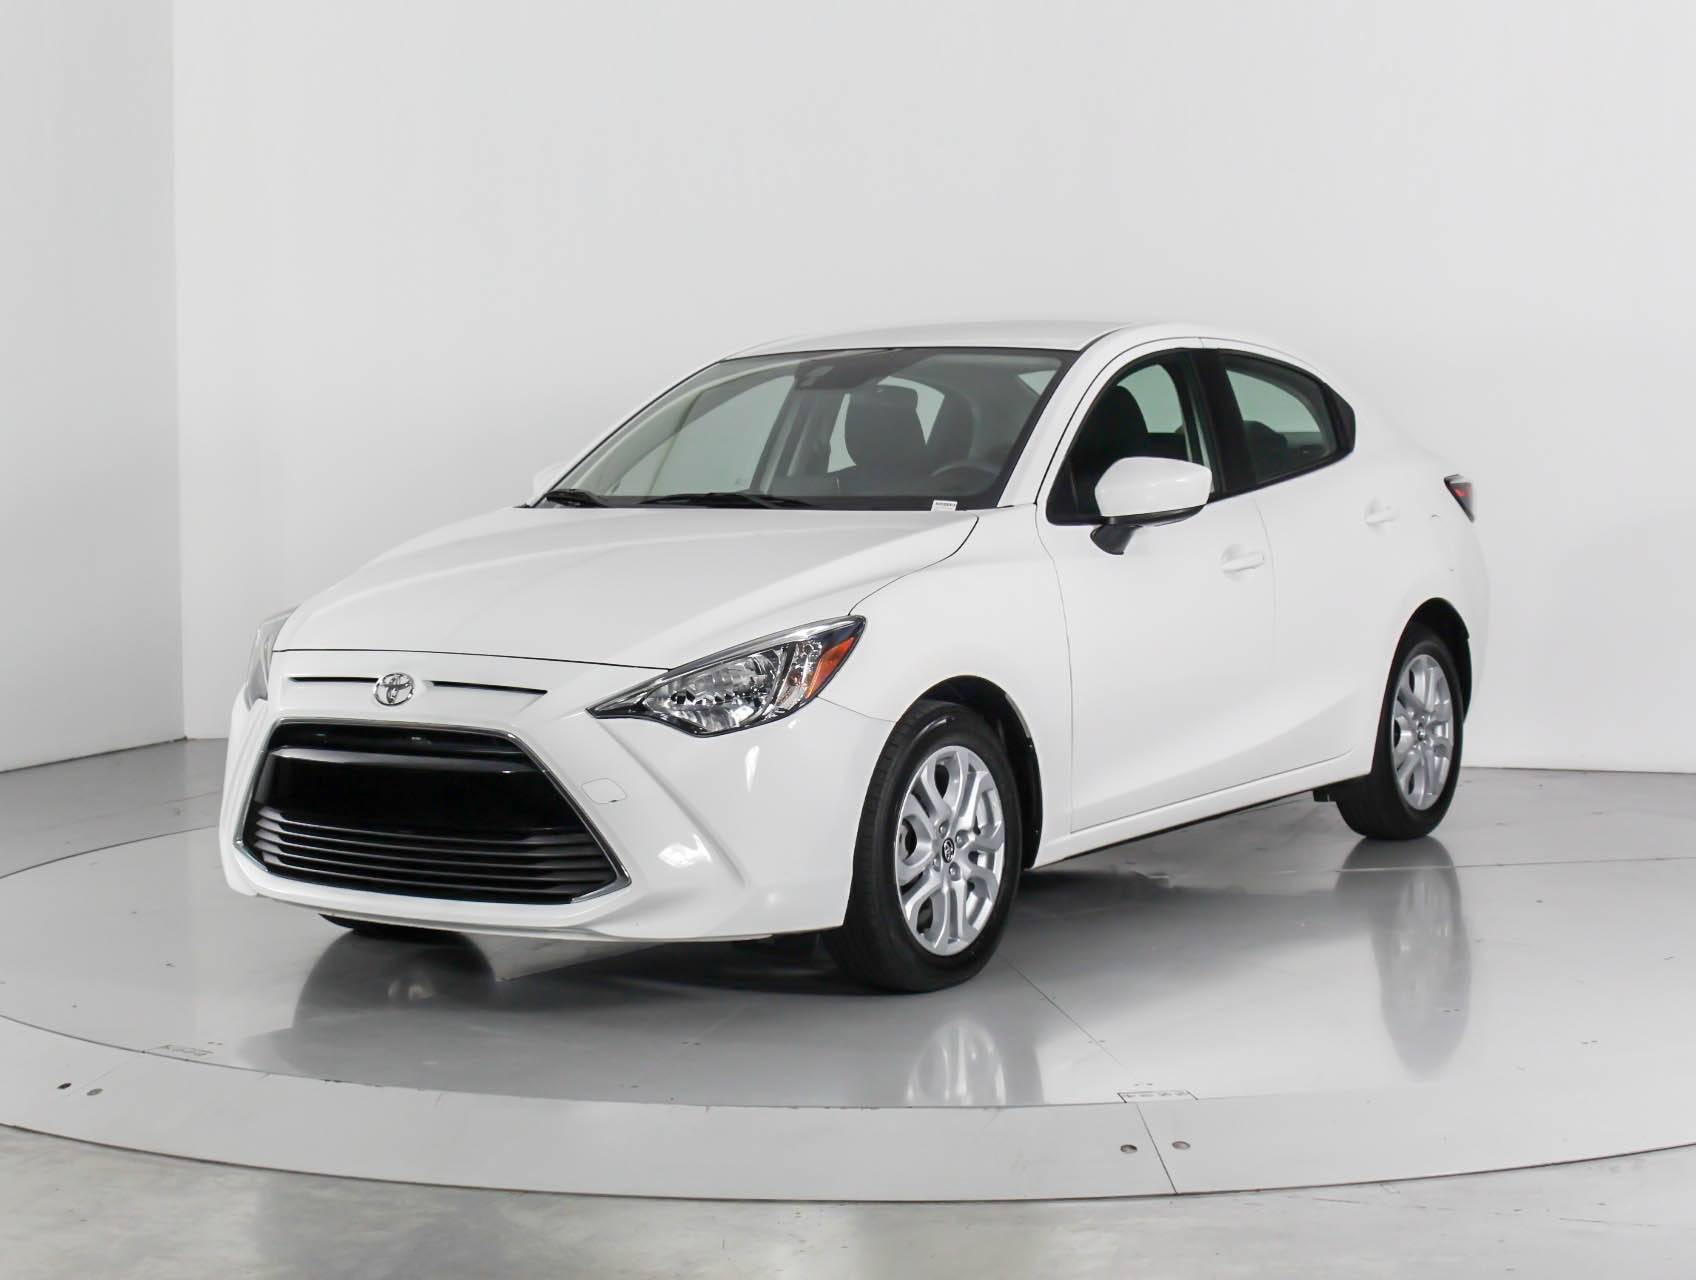 Used 2017 TOYOTA YARIS IA for sale in WEST PALM | 100891